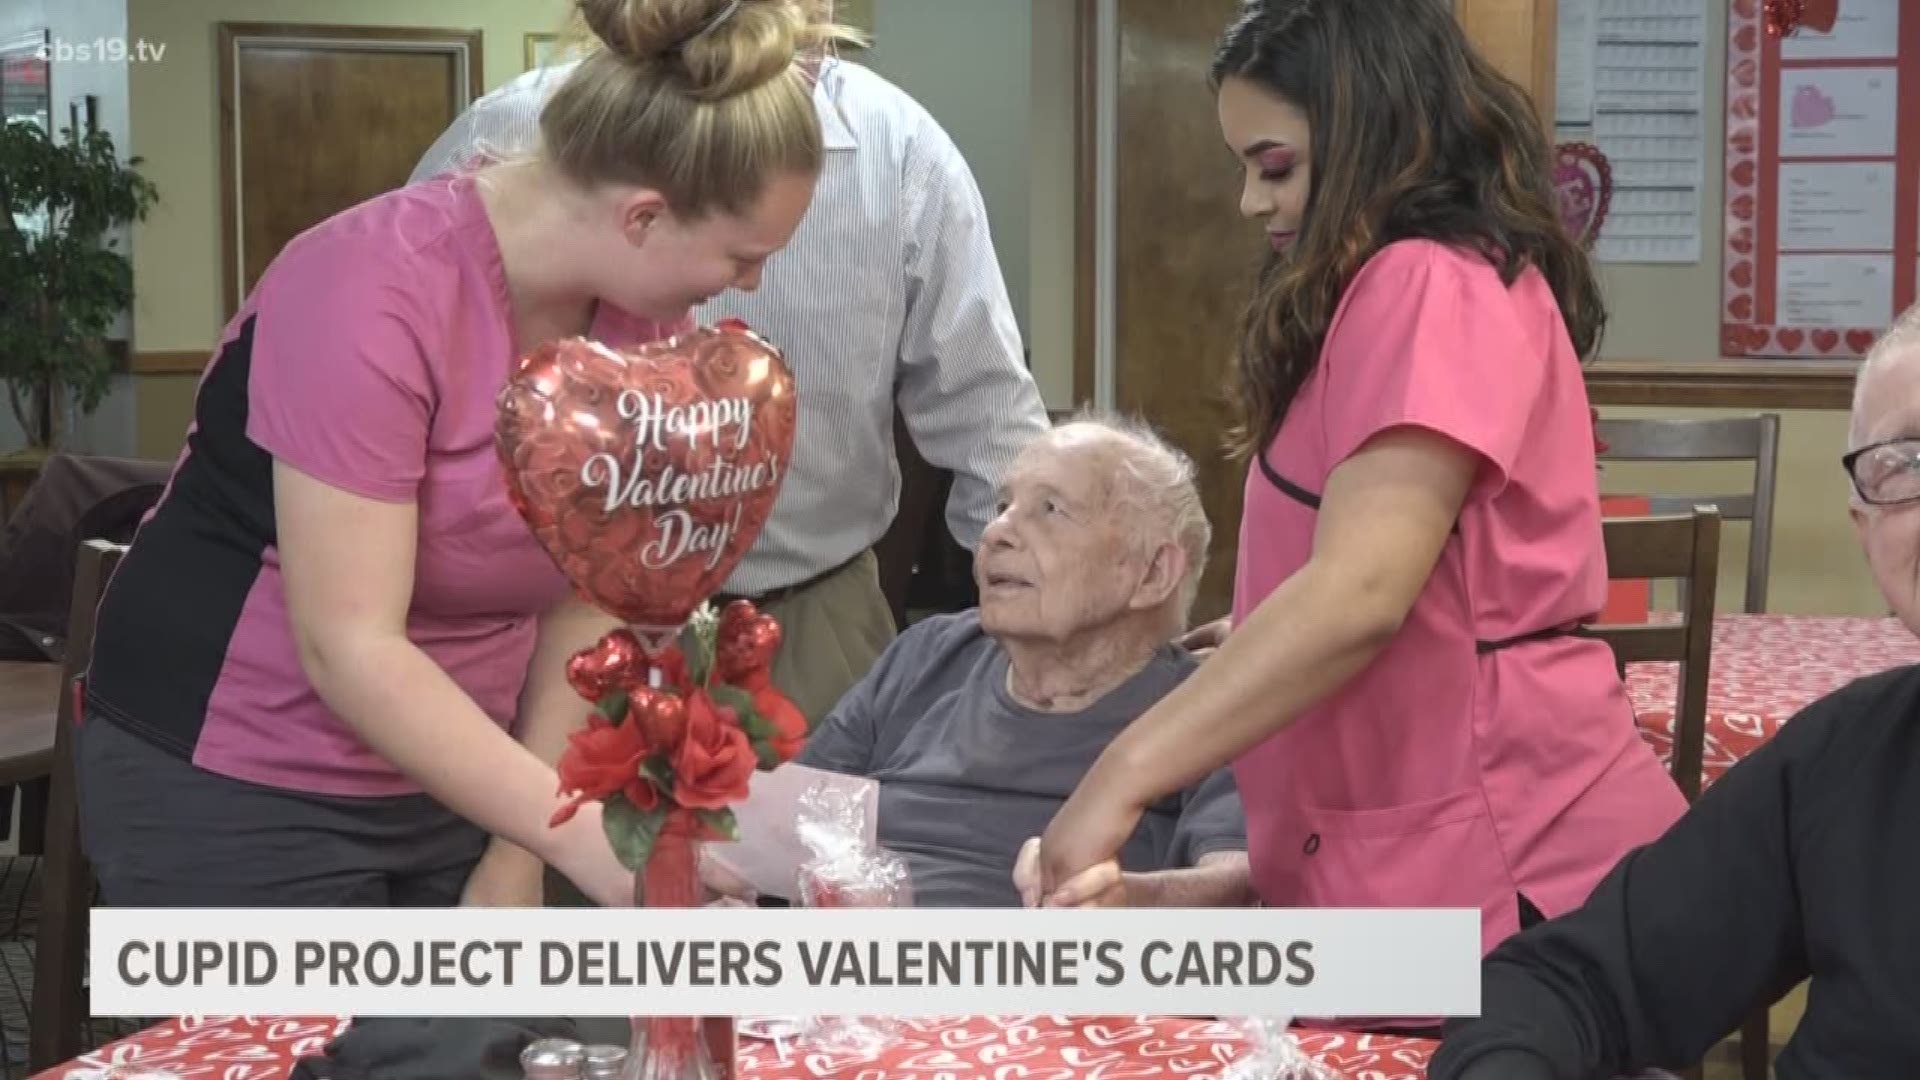 Thousands of cards were delivered to people across East Texas who needed some Valentine's cheer.